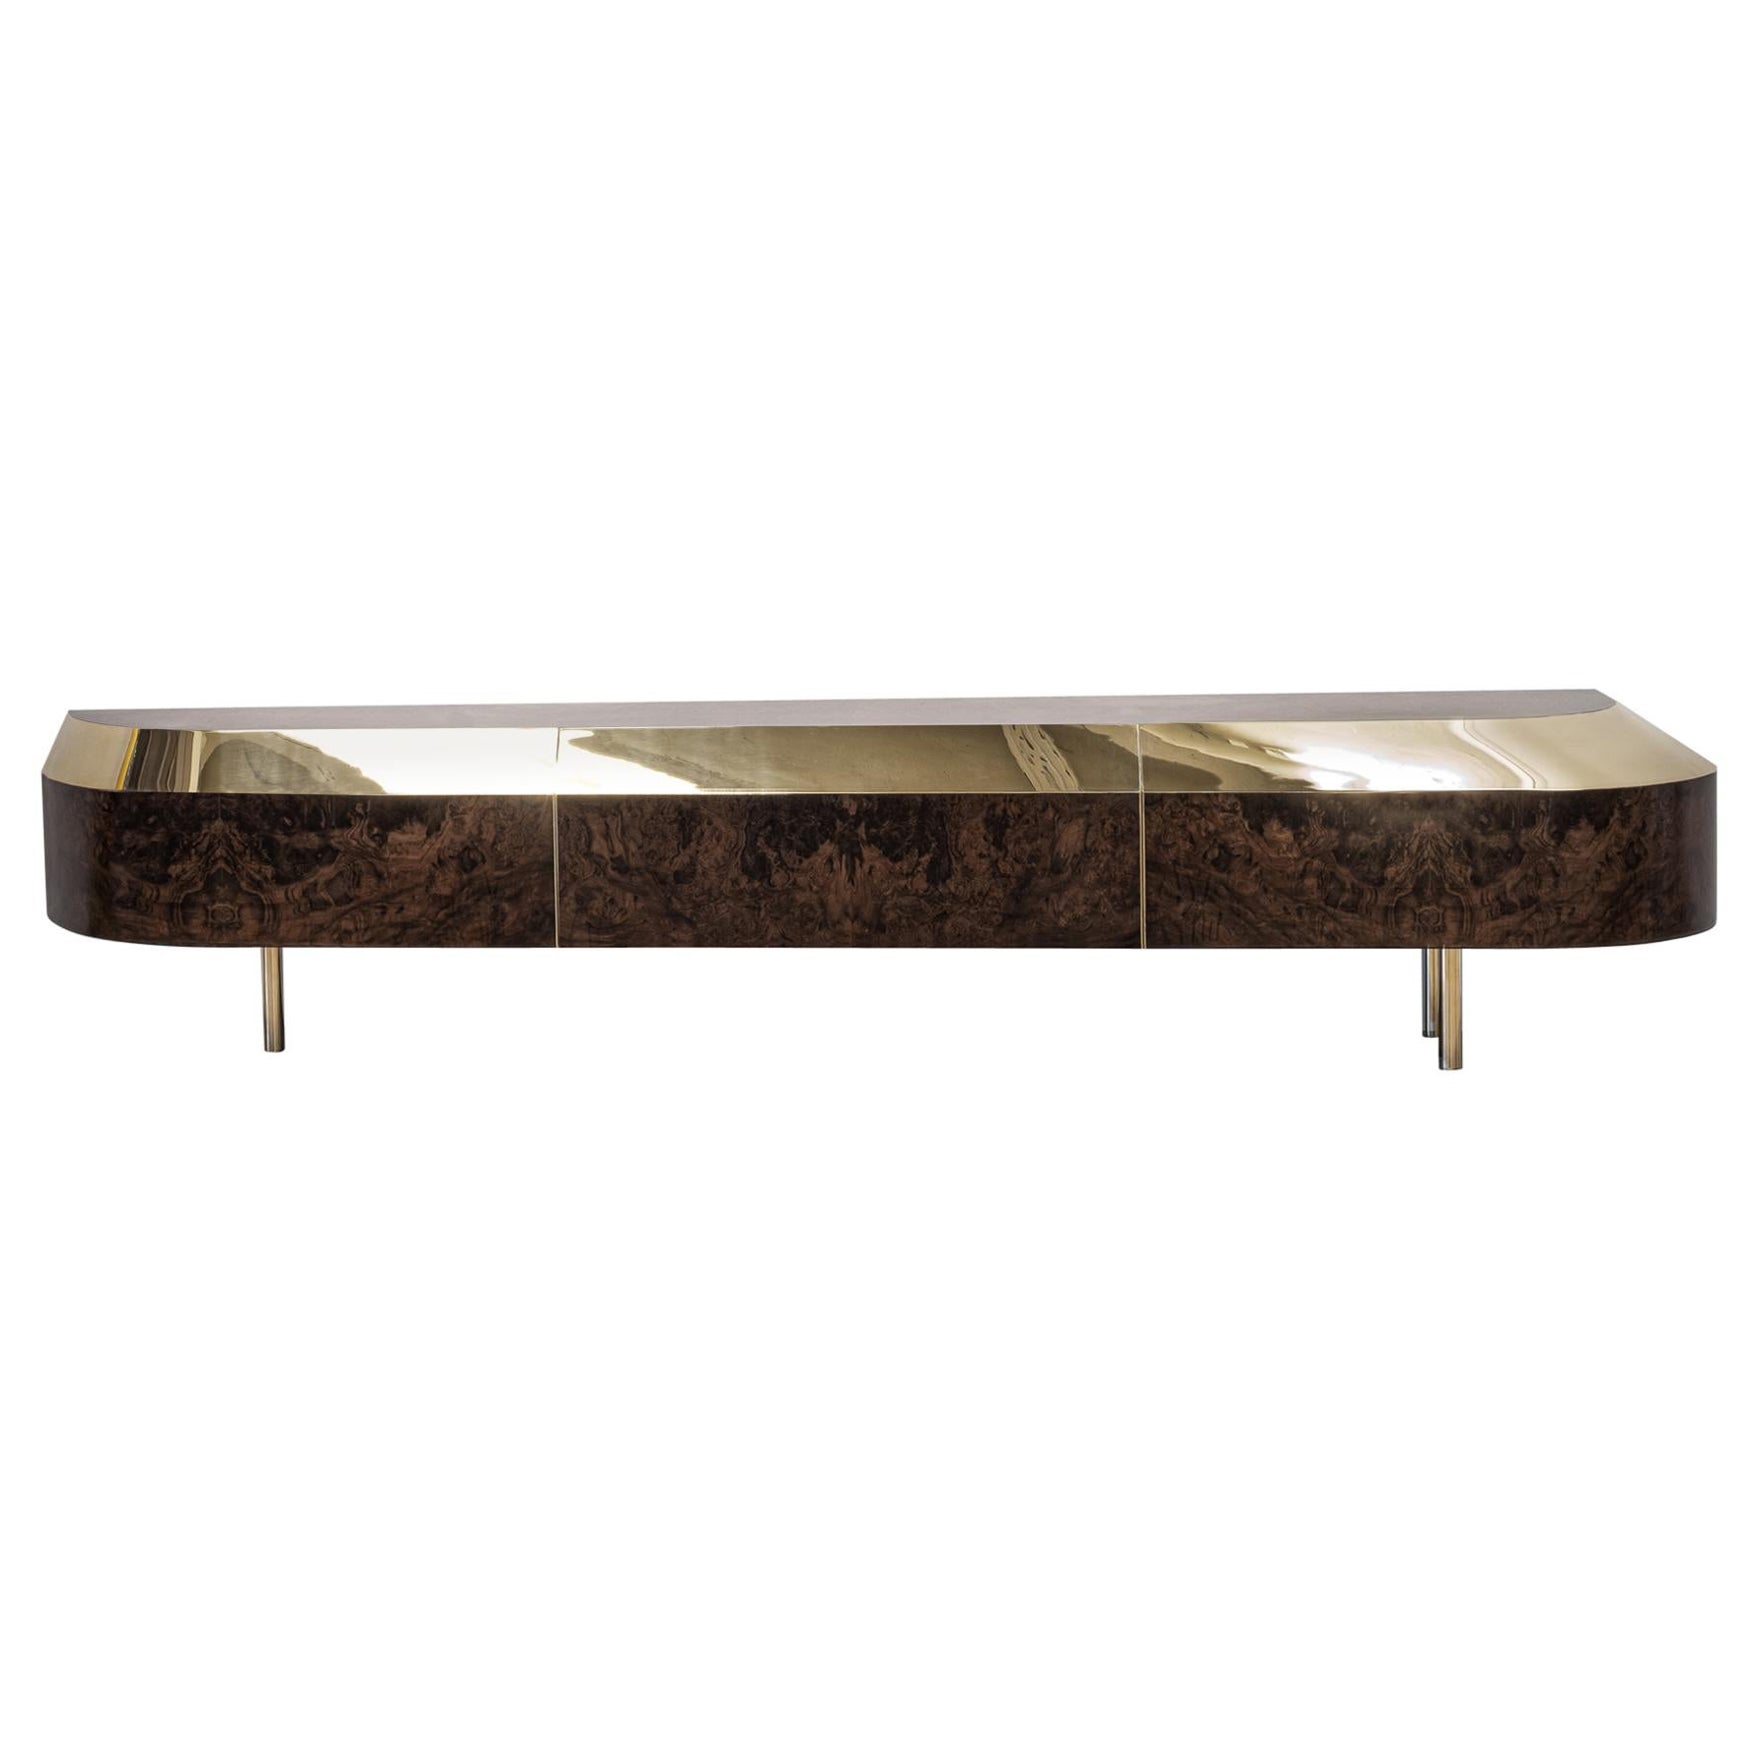 Distortion Series Object 5 Polished Brass Console by Emelianova Studio For Sale